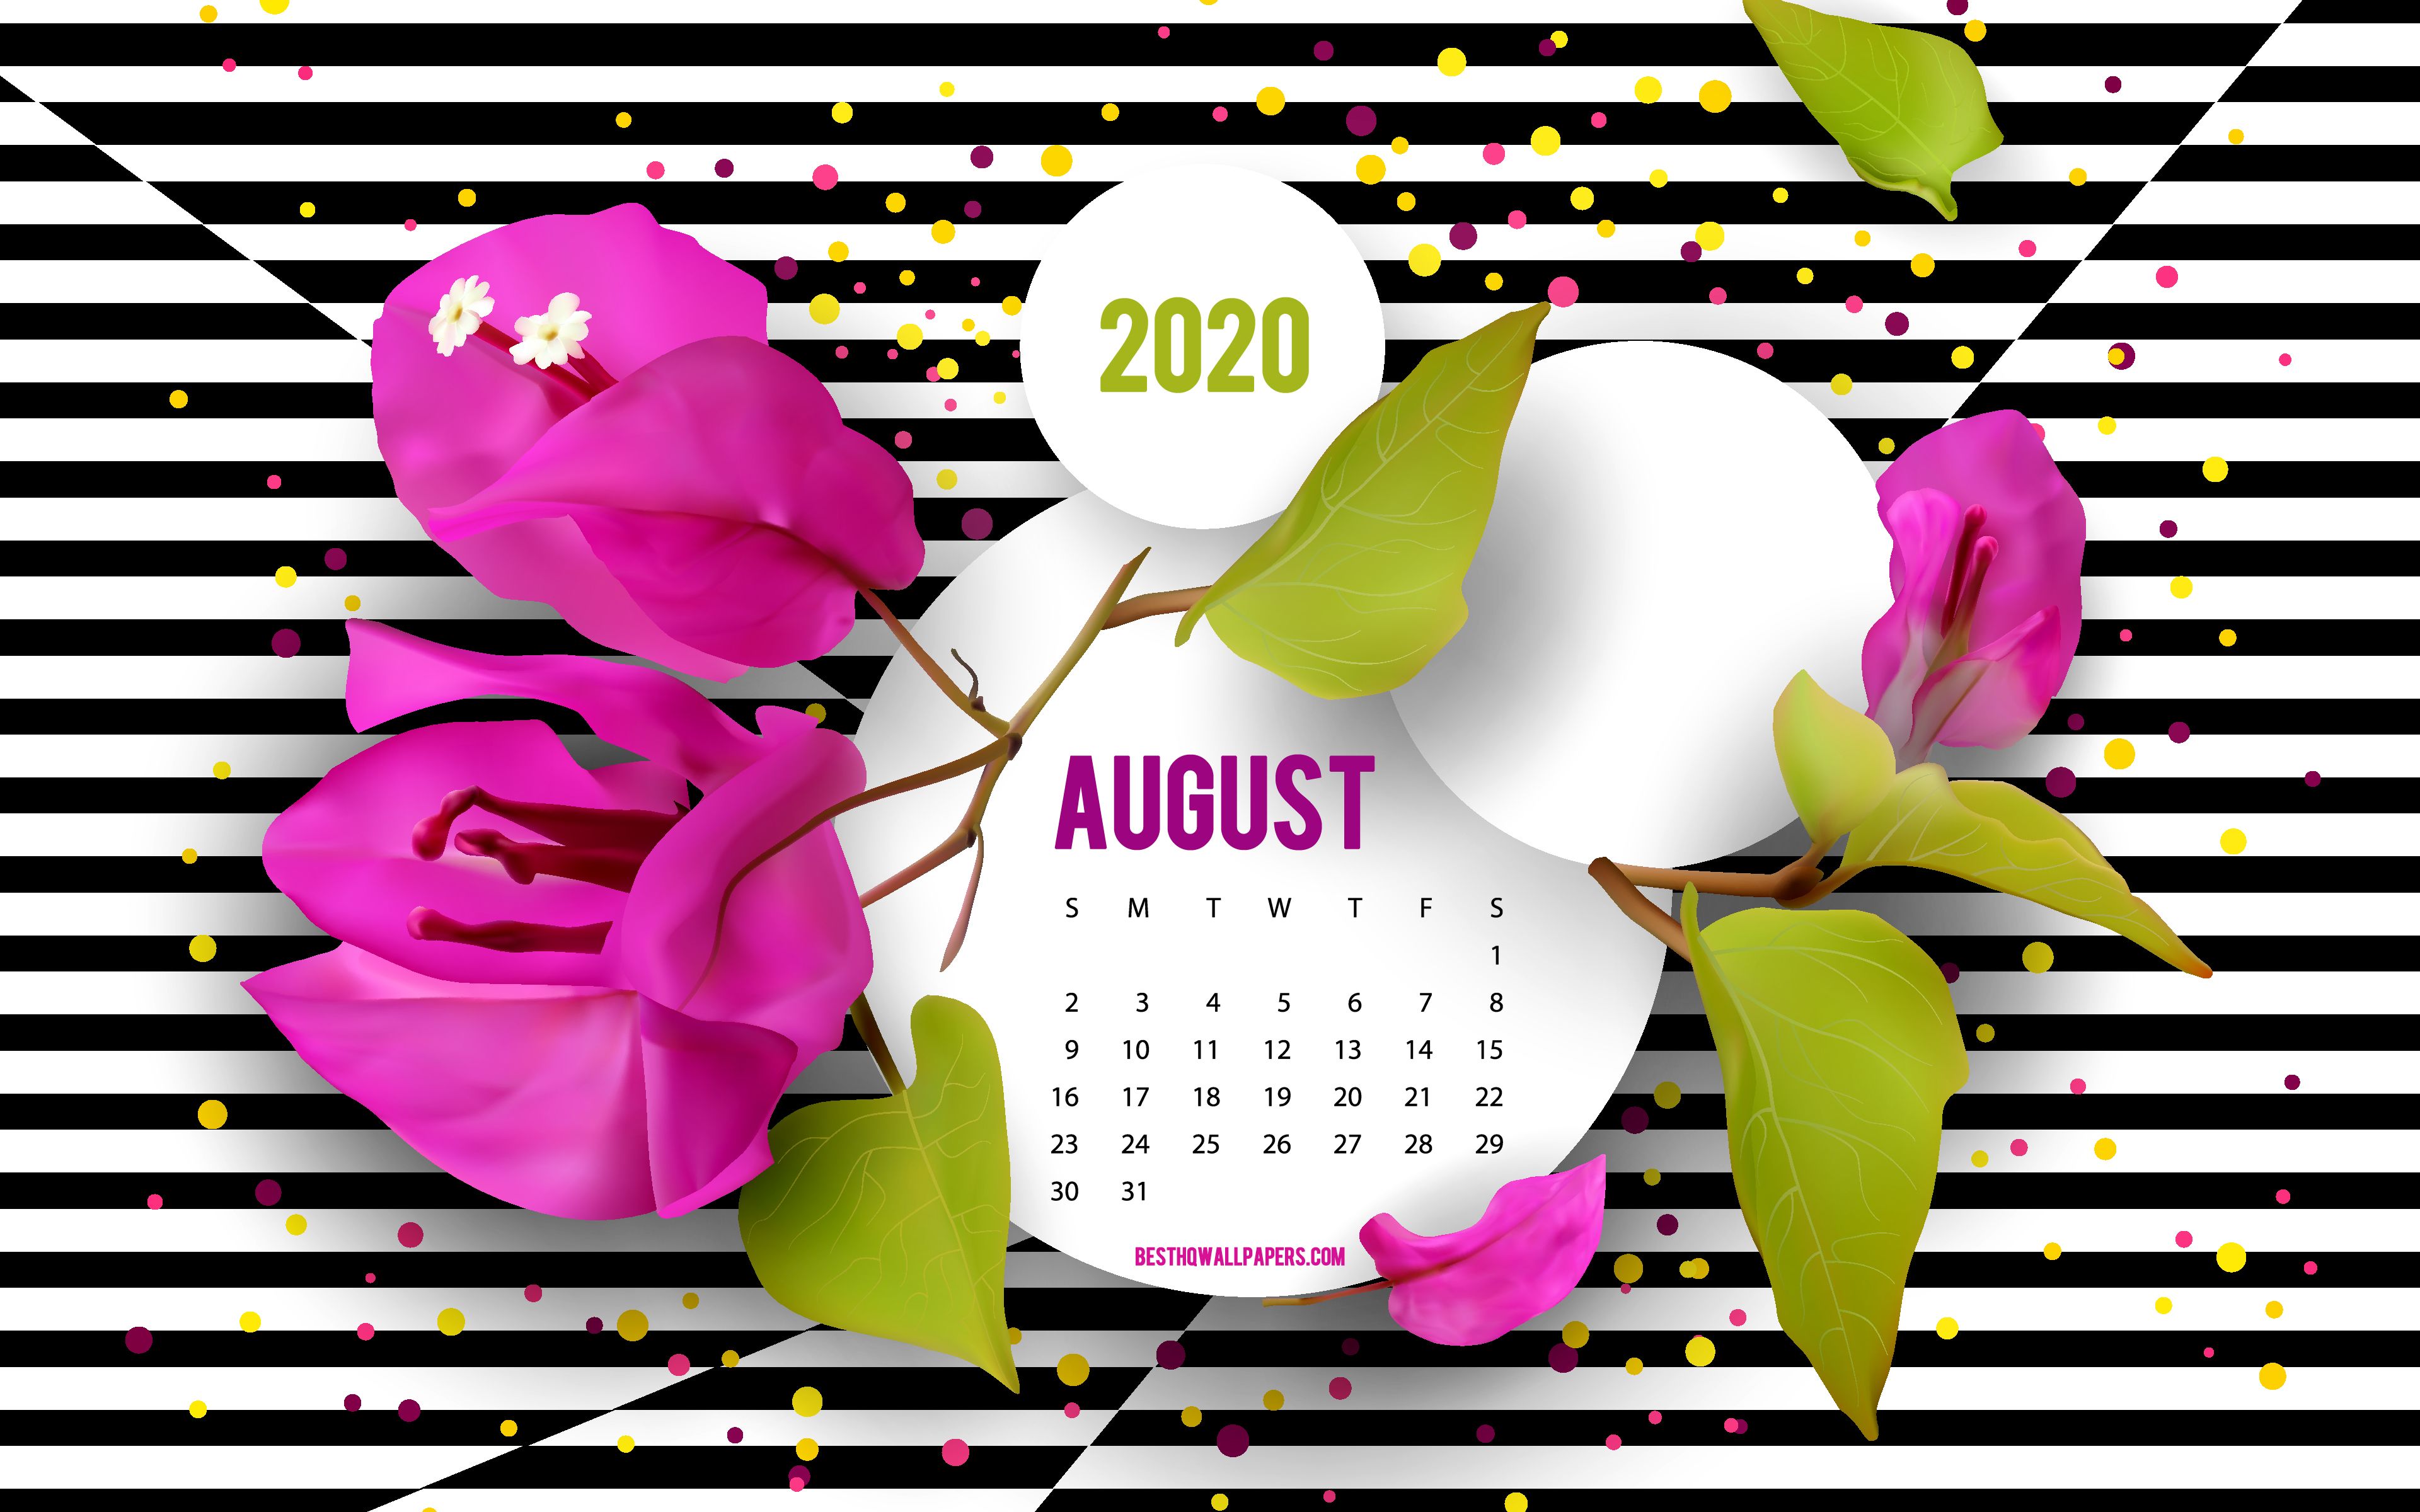 August 2020 Wallpapers Wallpaper Cave